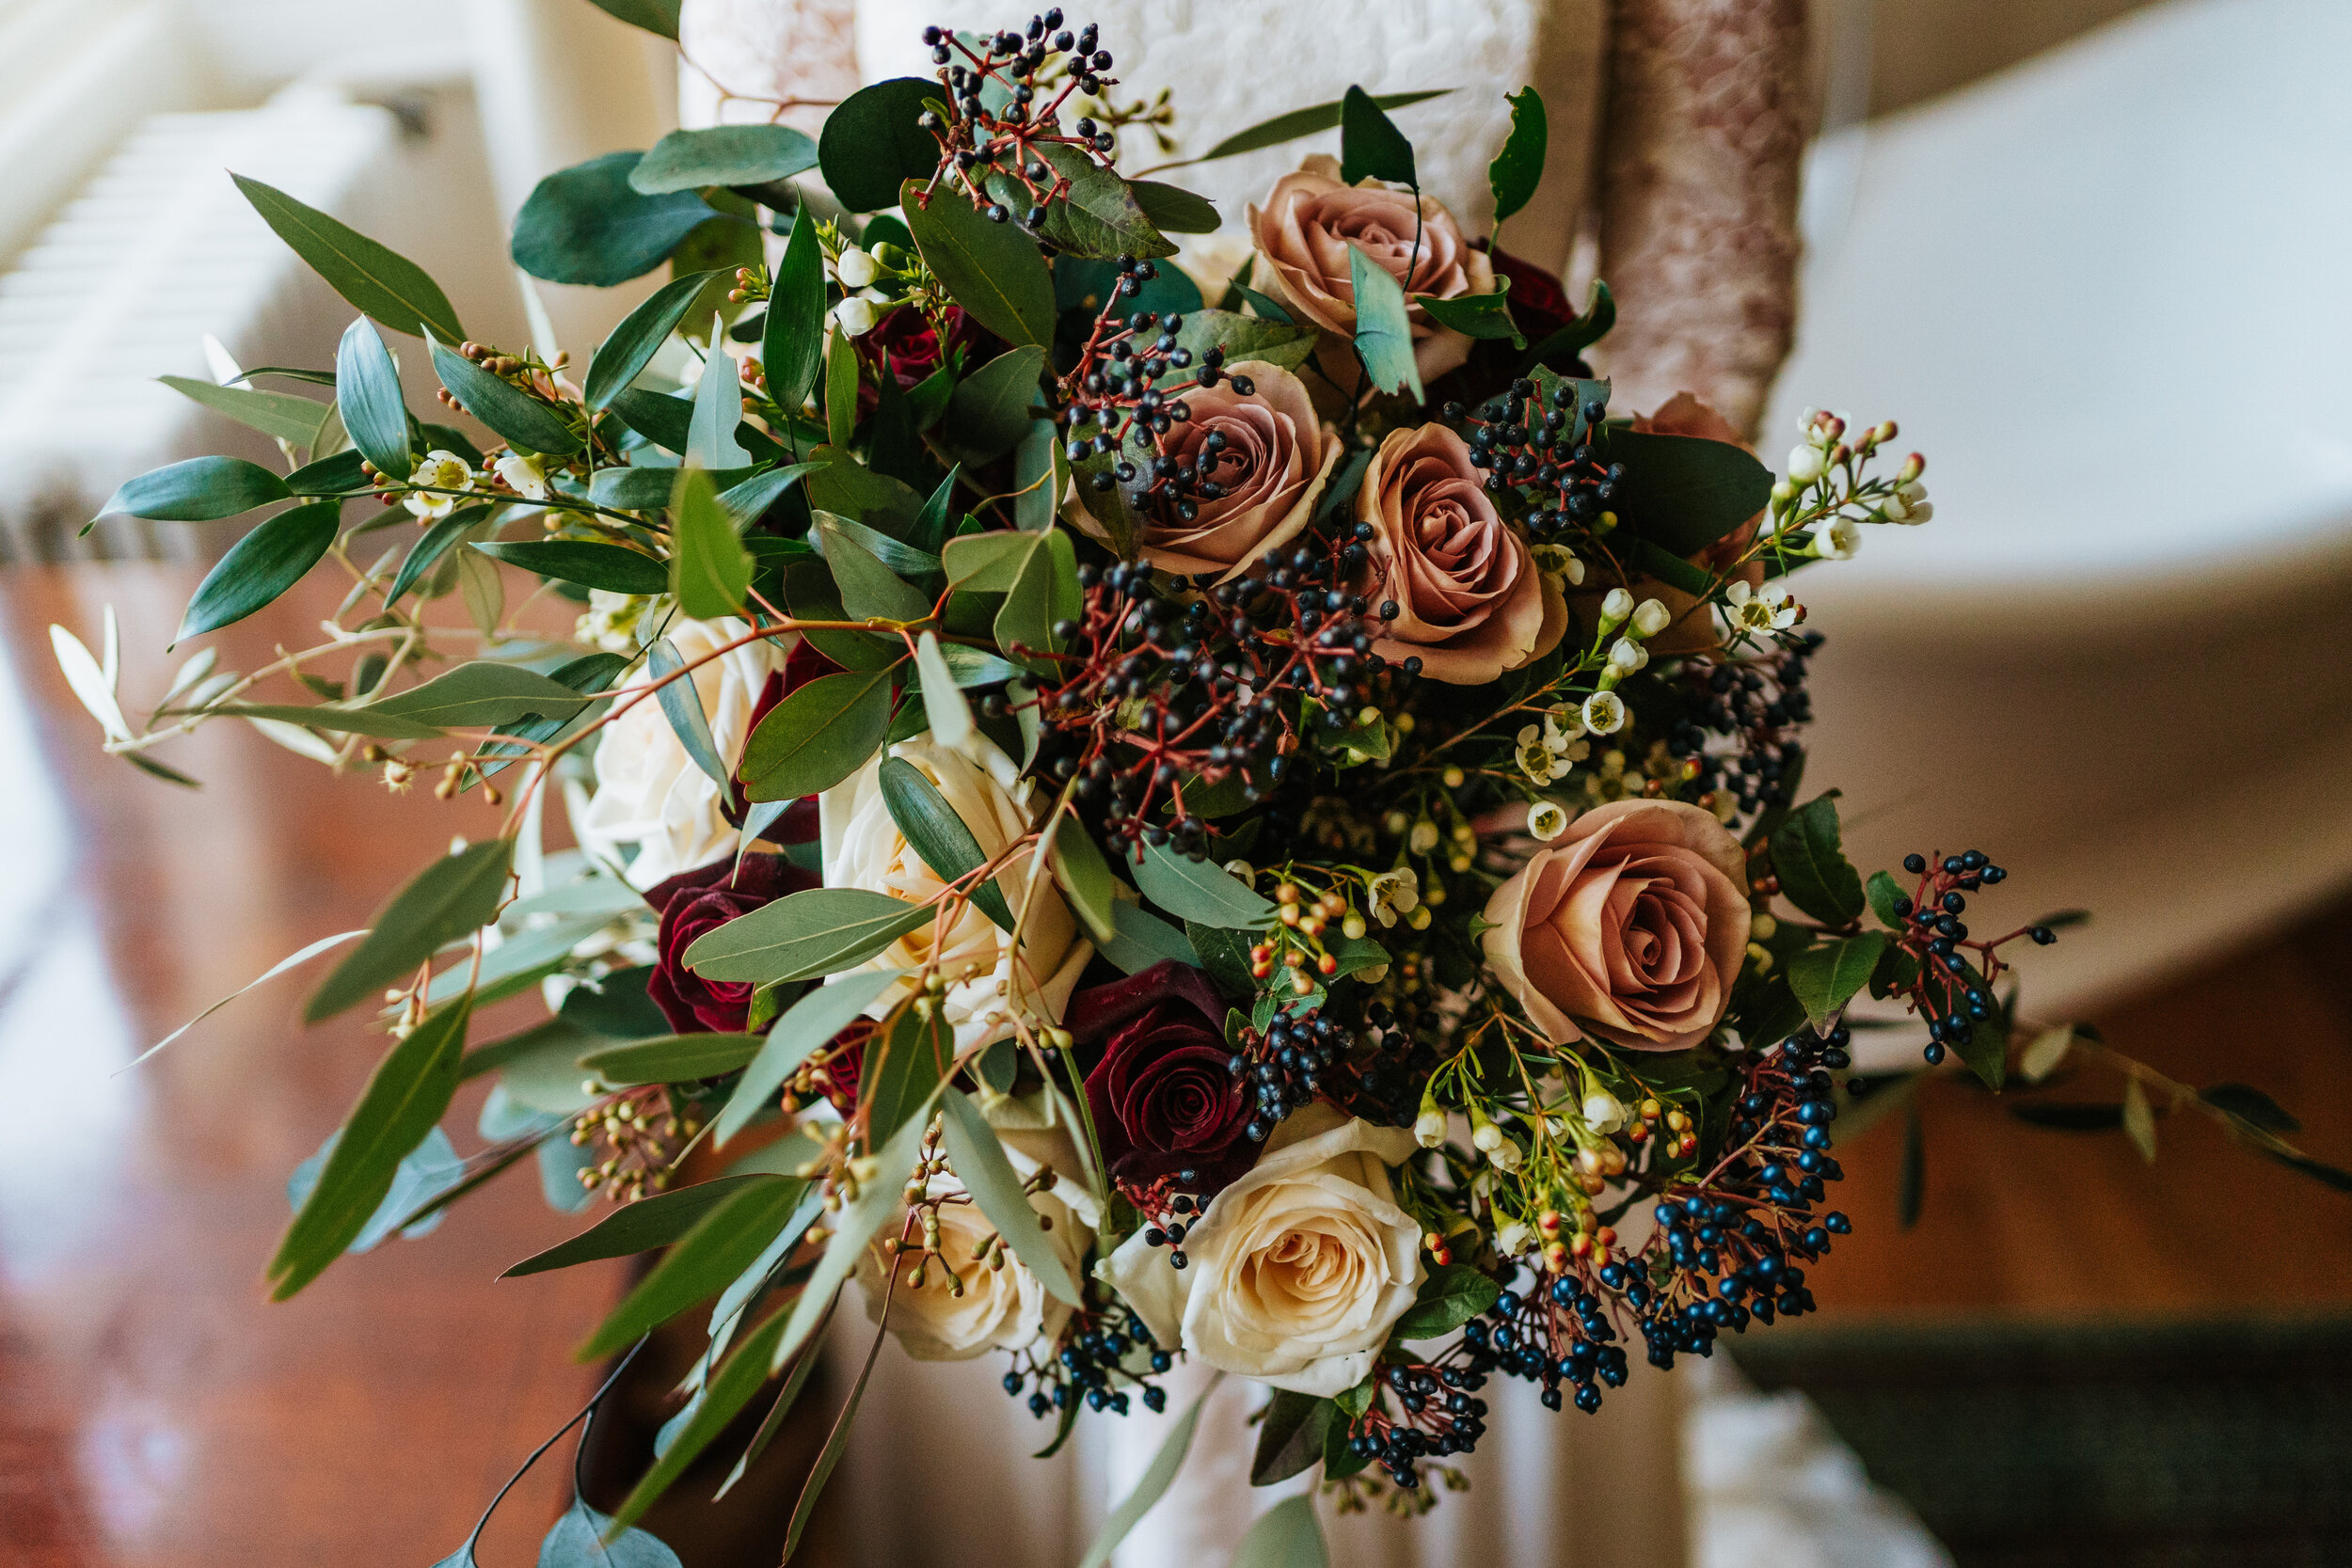 Hand tied bridal bouquet of roses and berries with green foliage